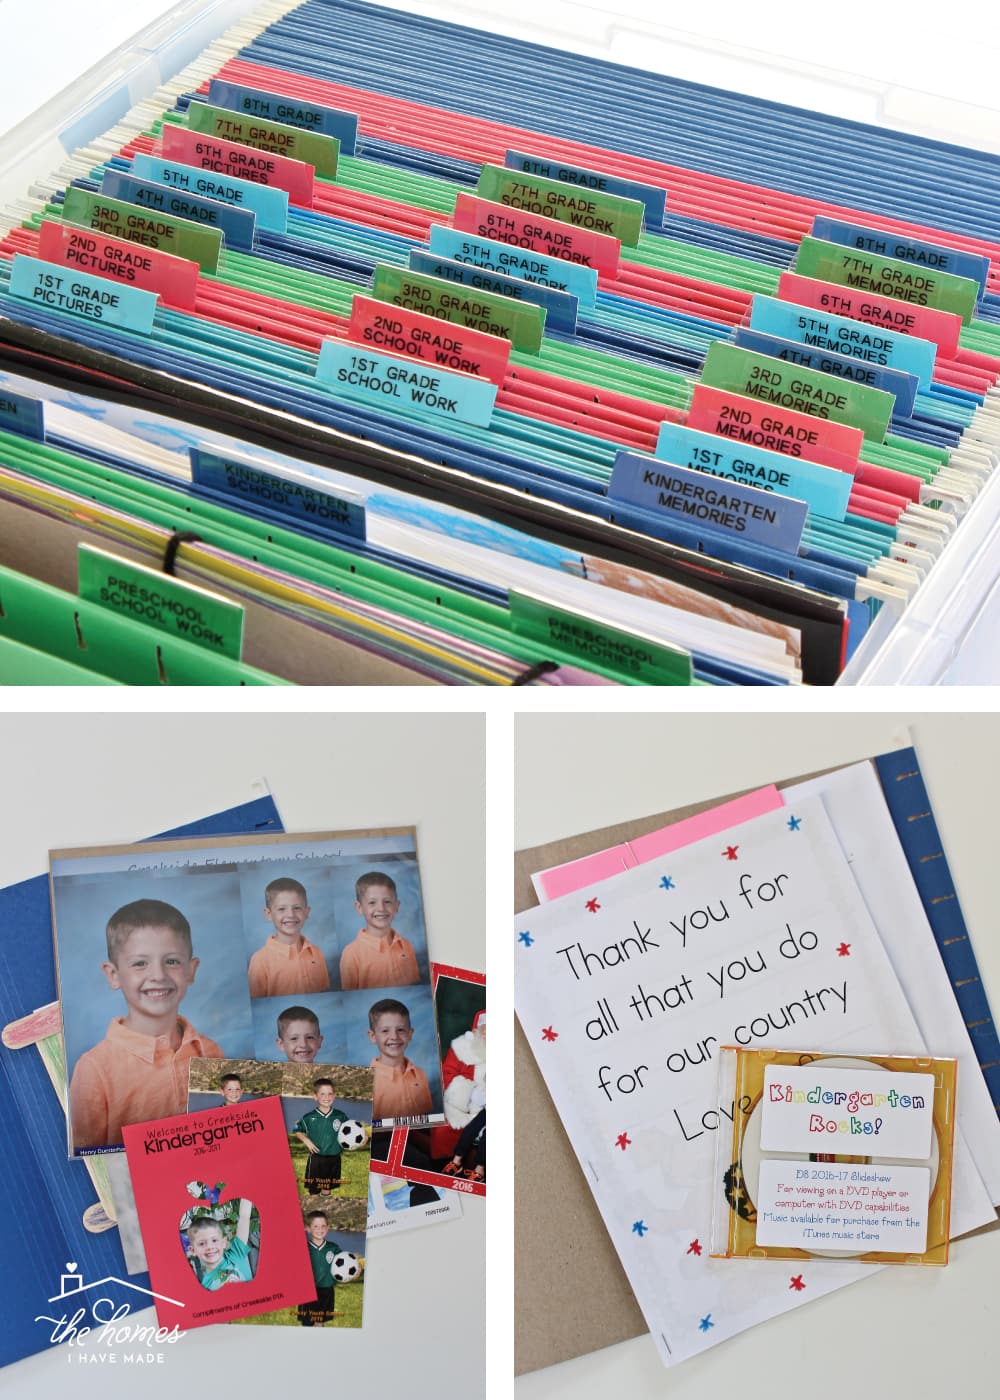 Get ideas for organizing all the little papers in life such as receipts, coupons, manuals, holiday and birthday carts, and more!